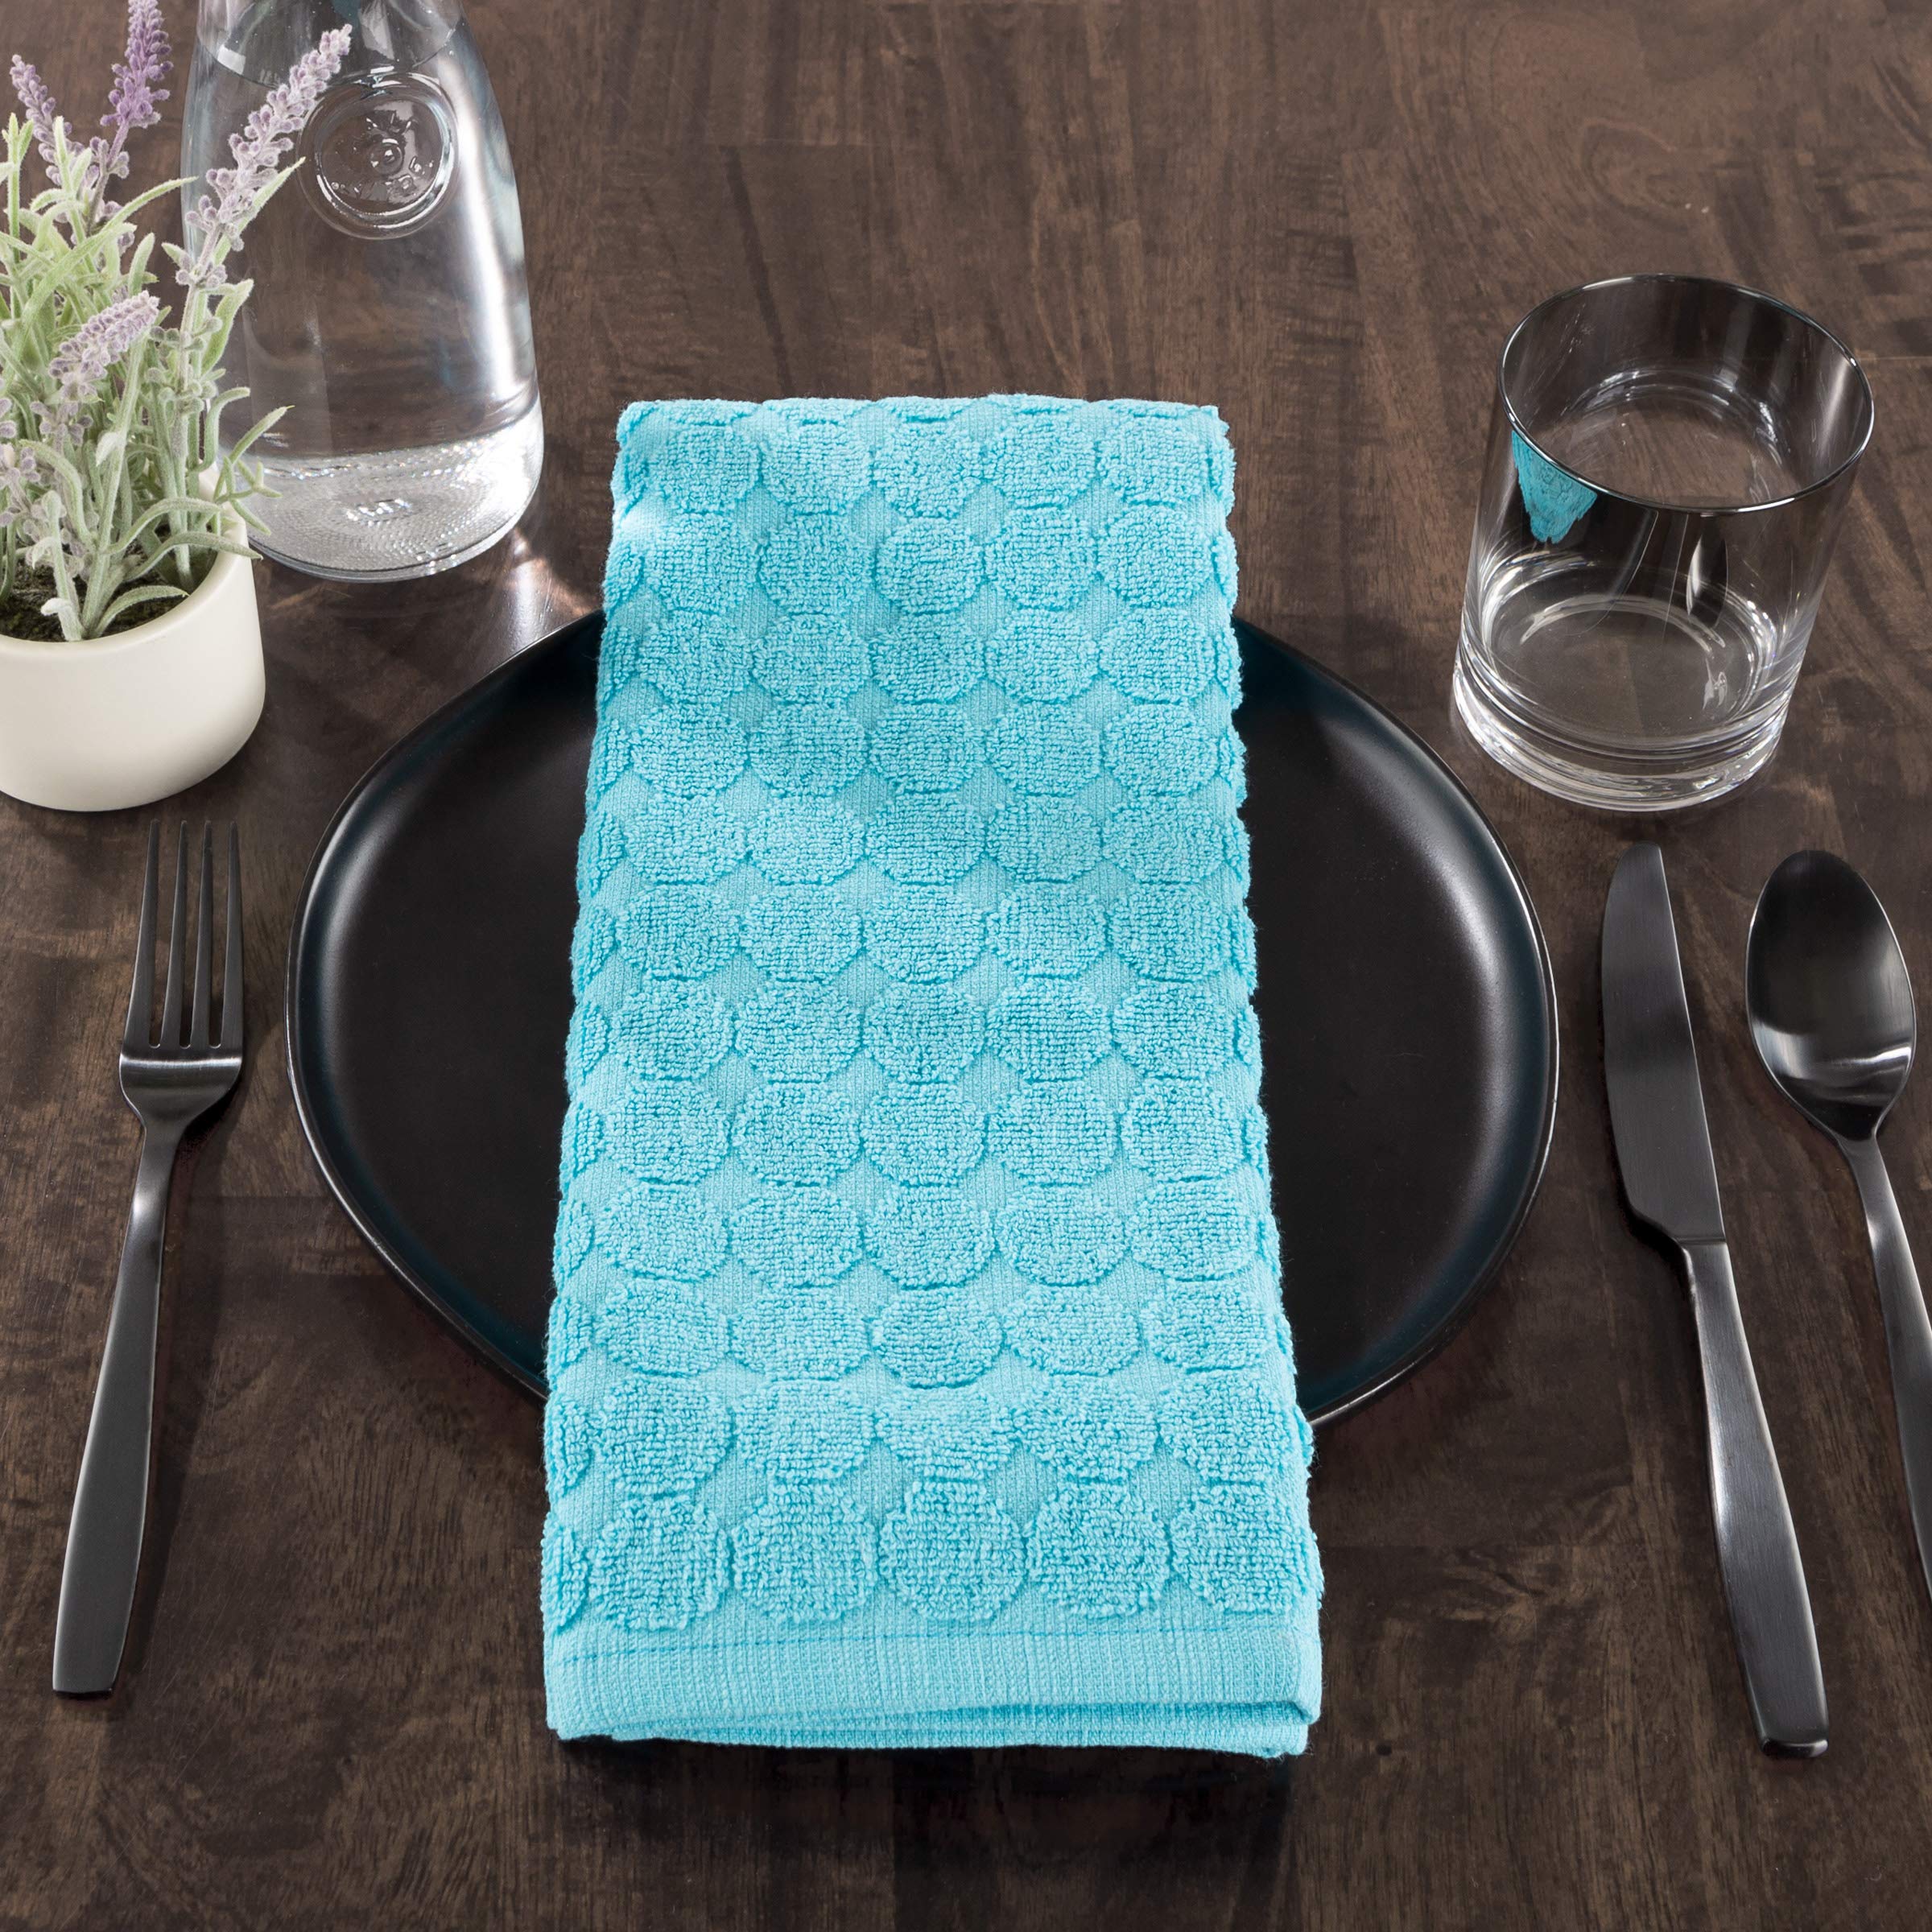 Bedford Home Set of 8 Kitchen 16”x28”-Absorbent 100% Cotton Hand Towel-Modern Circle Pattern Weave in 4 Solid Colors-Dishtowels for Drying by Lavish Home, Multiple